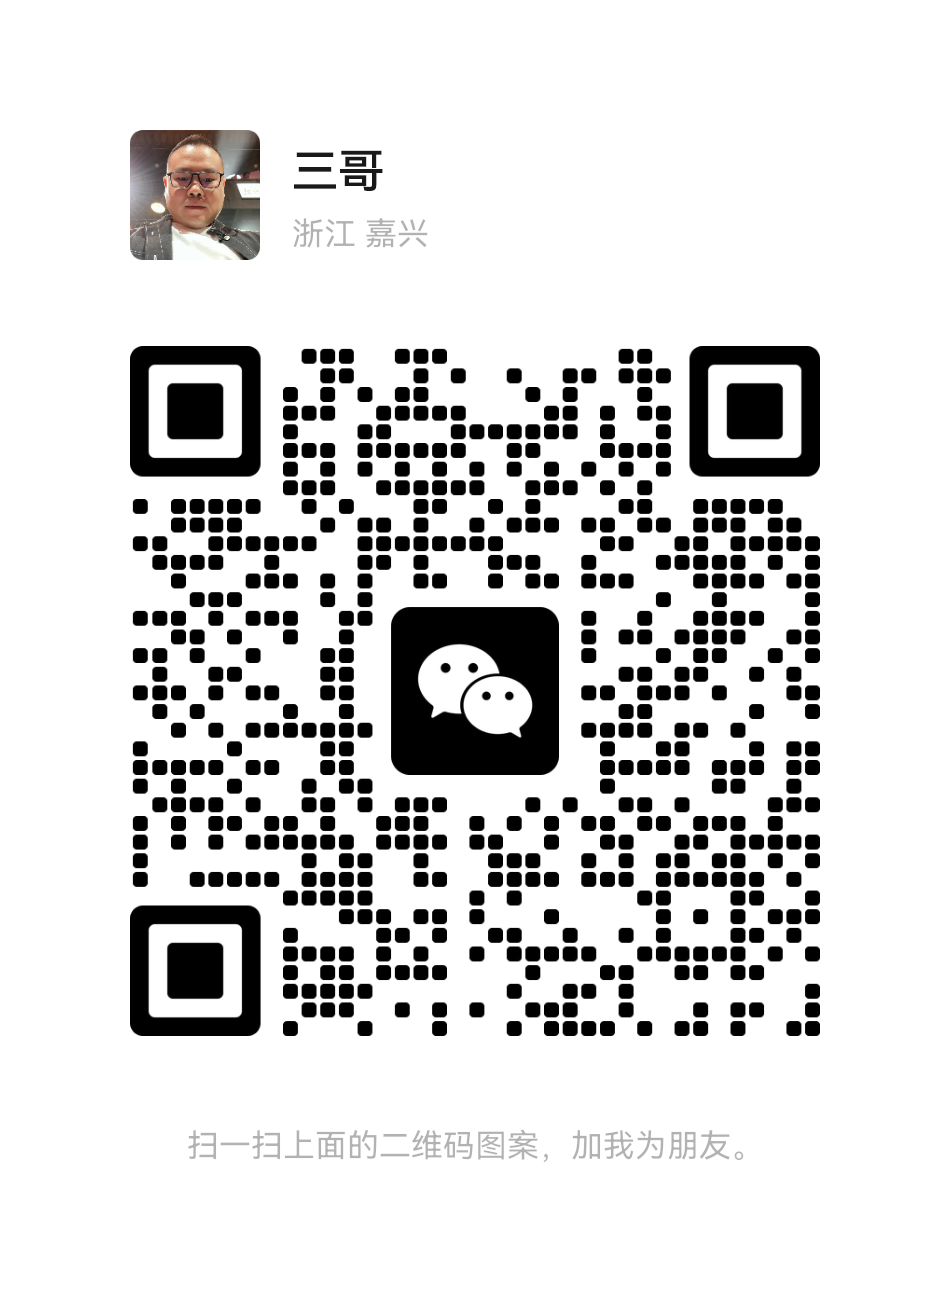 mmqrcode1667353947518.png